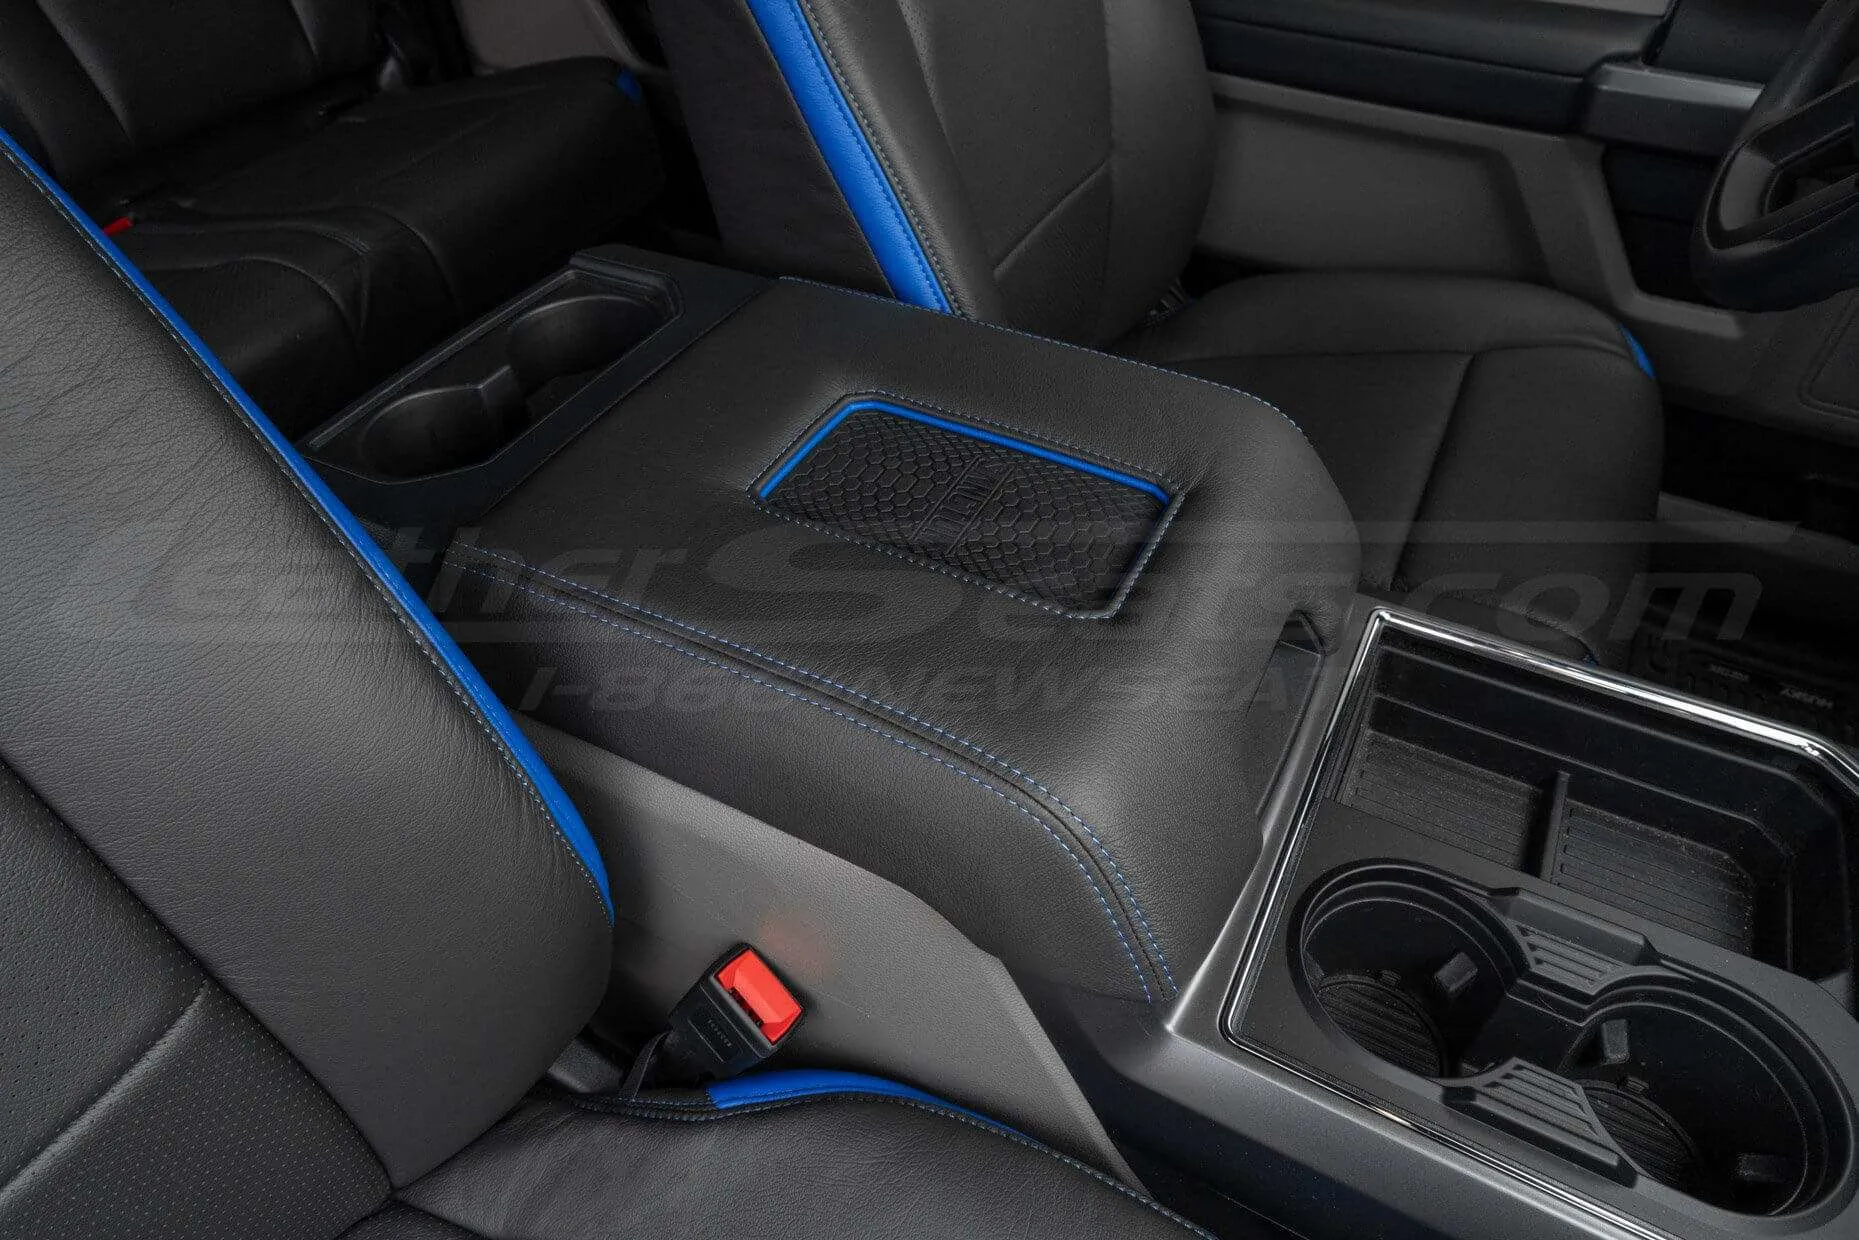 + Ford Superduty Sanctum Wireless Charging Console in Dark Graphite with Cobalt stitching and Trim Ring - Installed